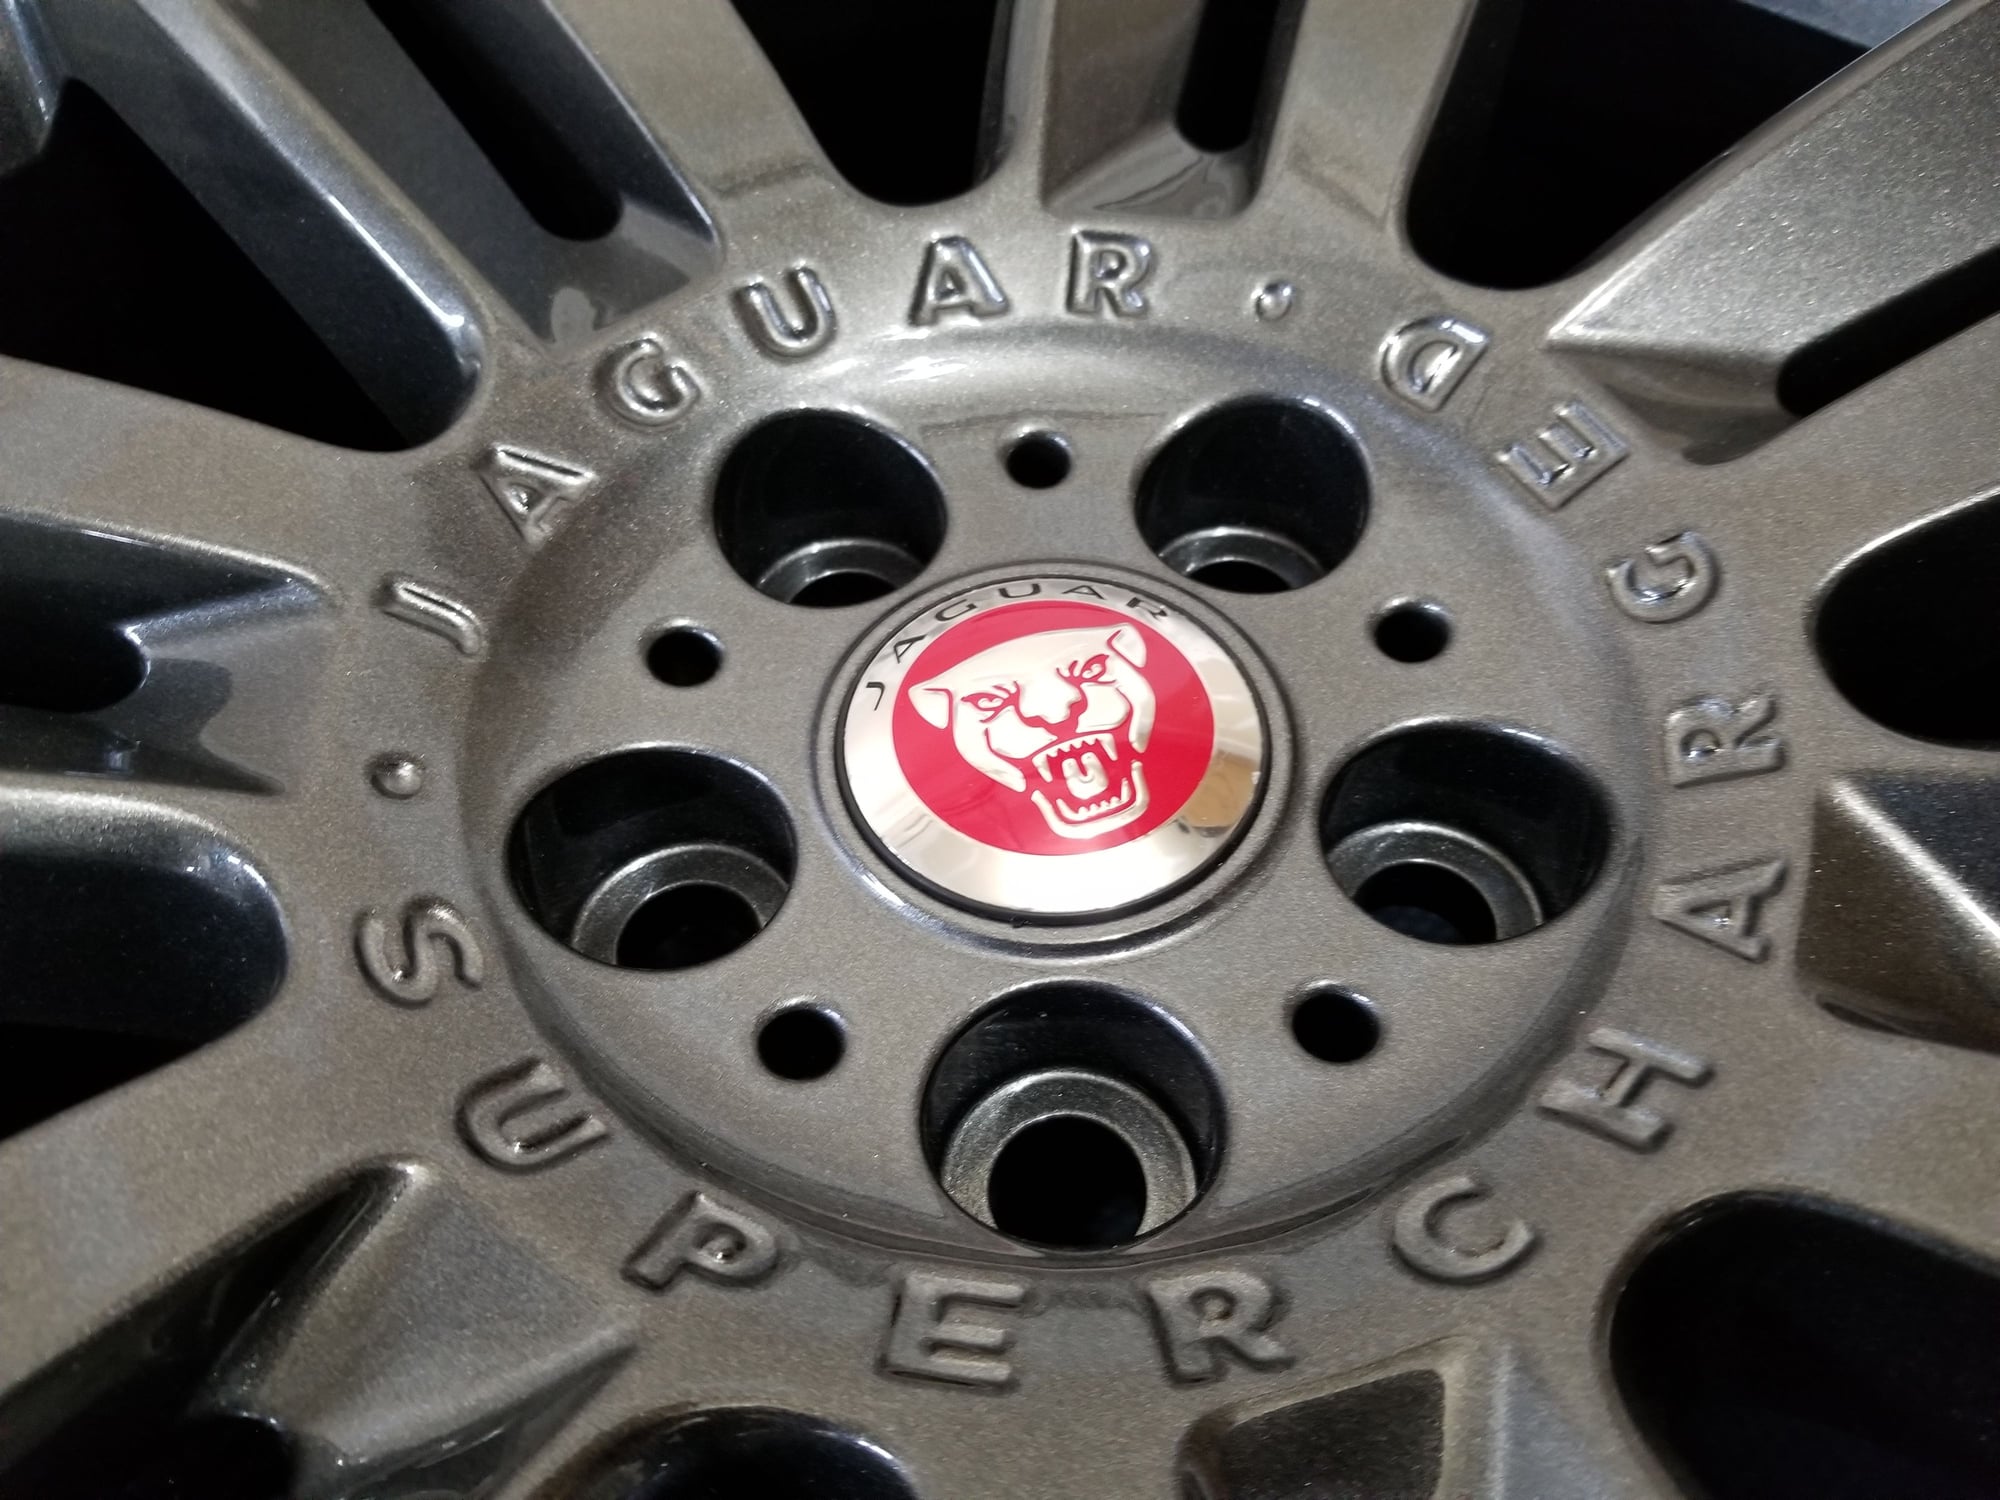 Wheels and Tires/Axles - Jaguar "Nevis" Wheels (TPMS) - Canada Listing - New - Toronto, ON M4Y1R5, Canada